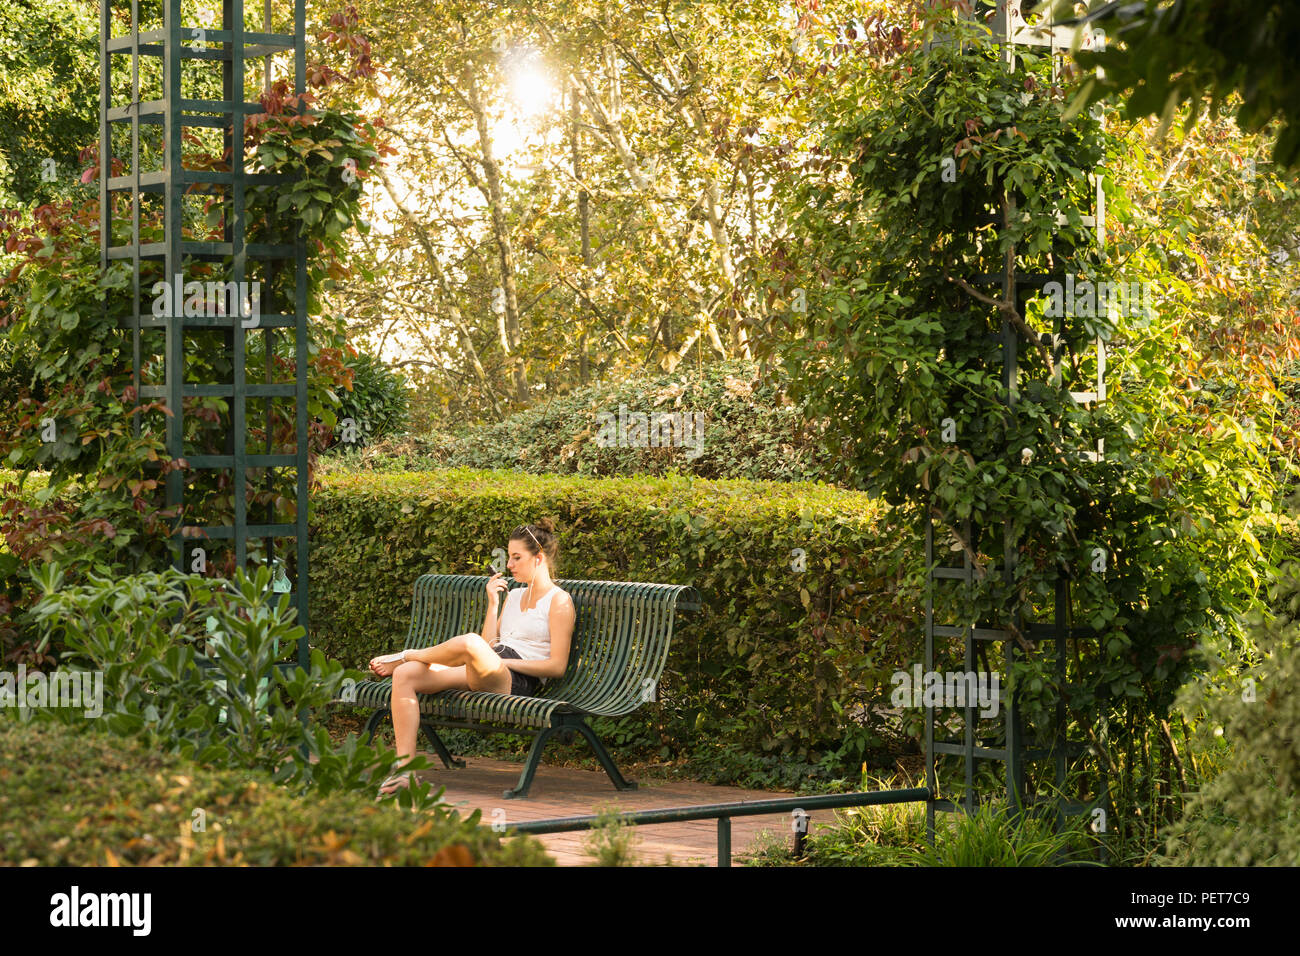 Paris greenery and urban garden - Young woman talking on phone at the Promenade plantee elevated park in the 12th arrondissement of Paris, France. Stock Photo